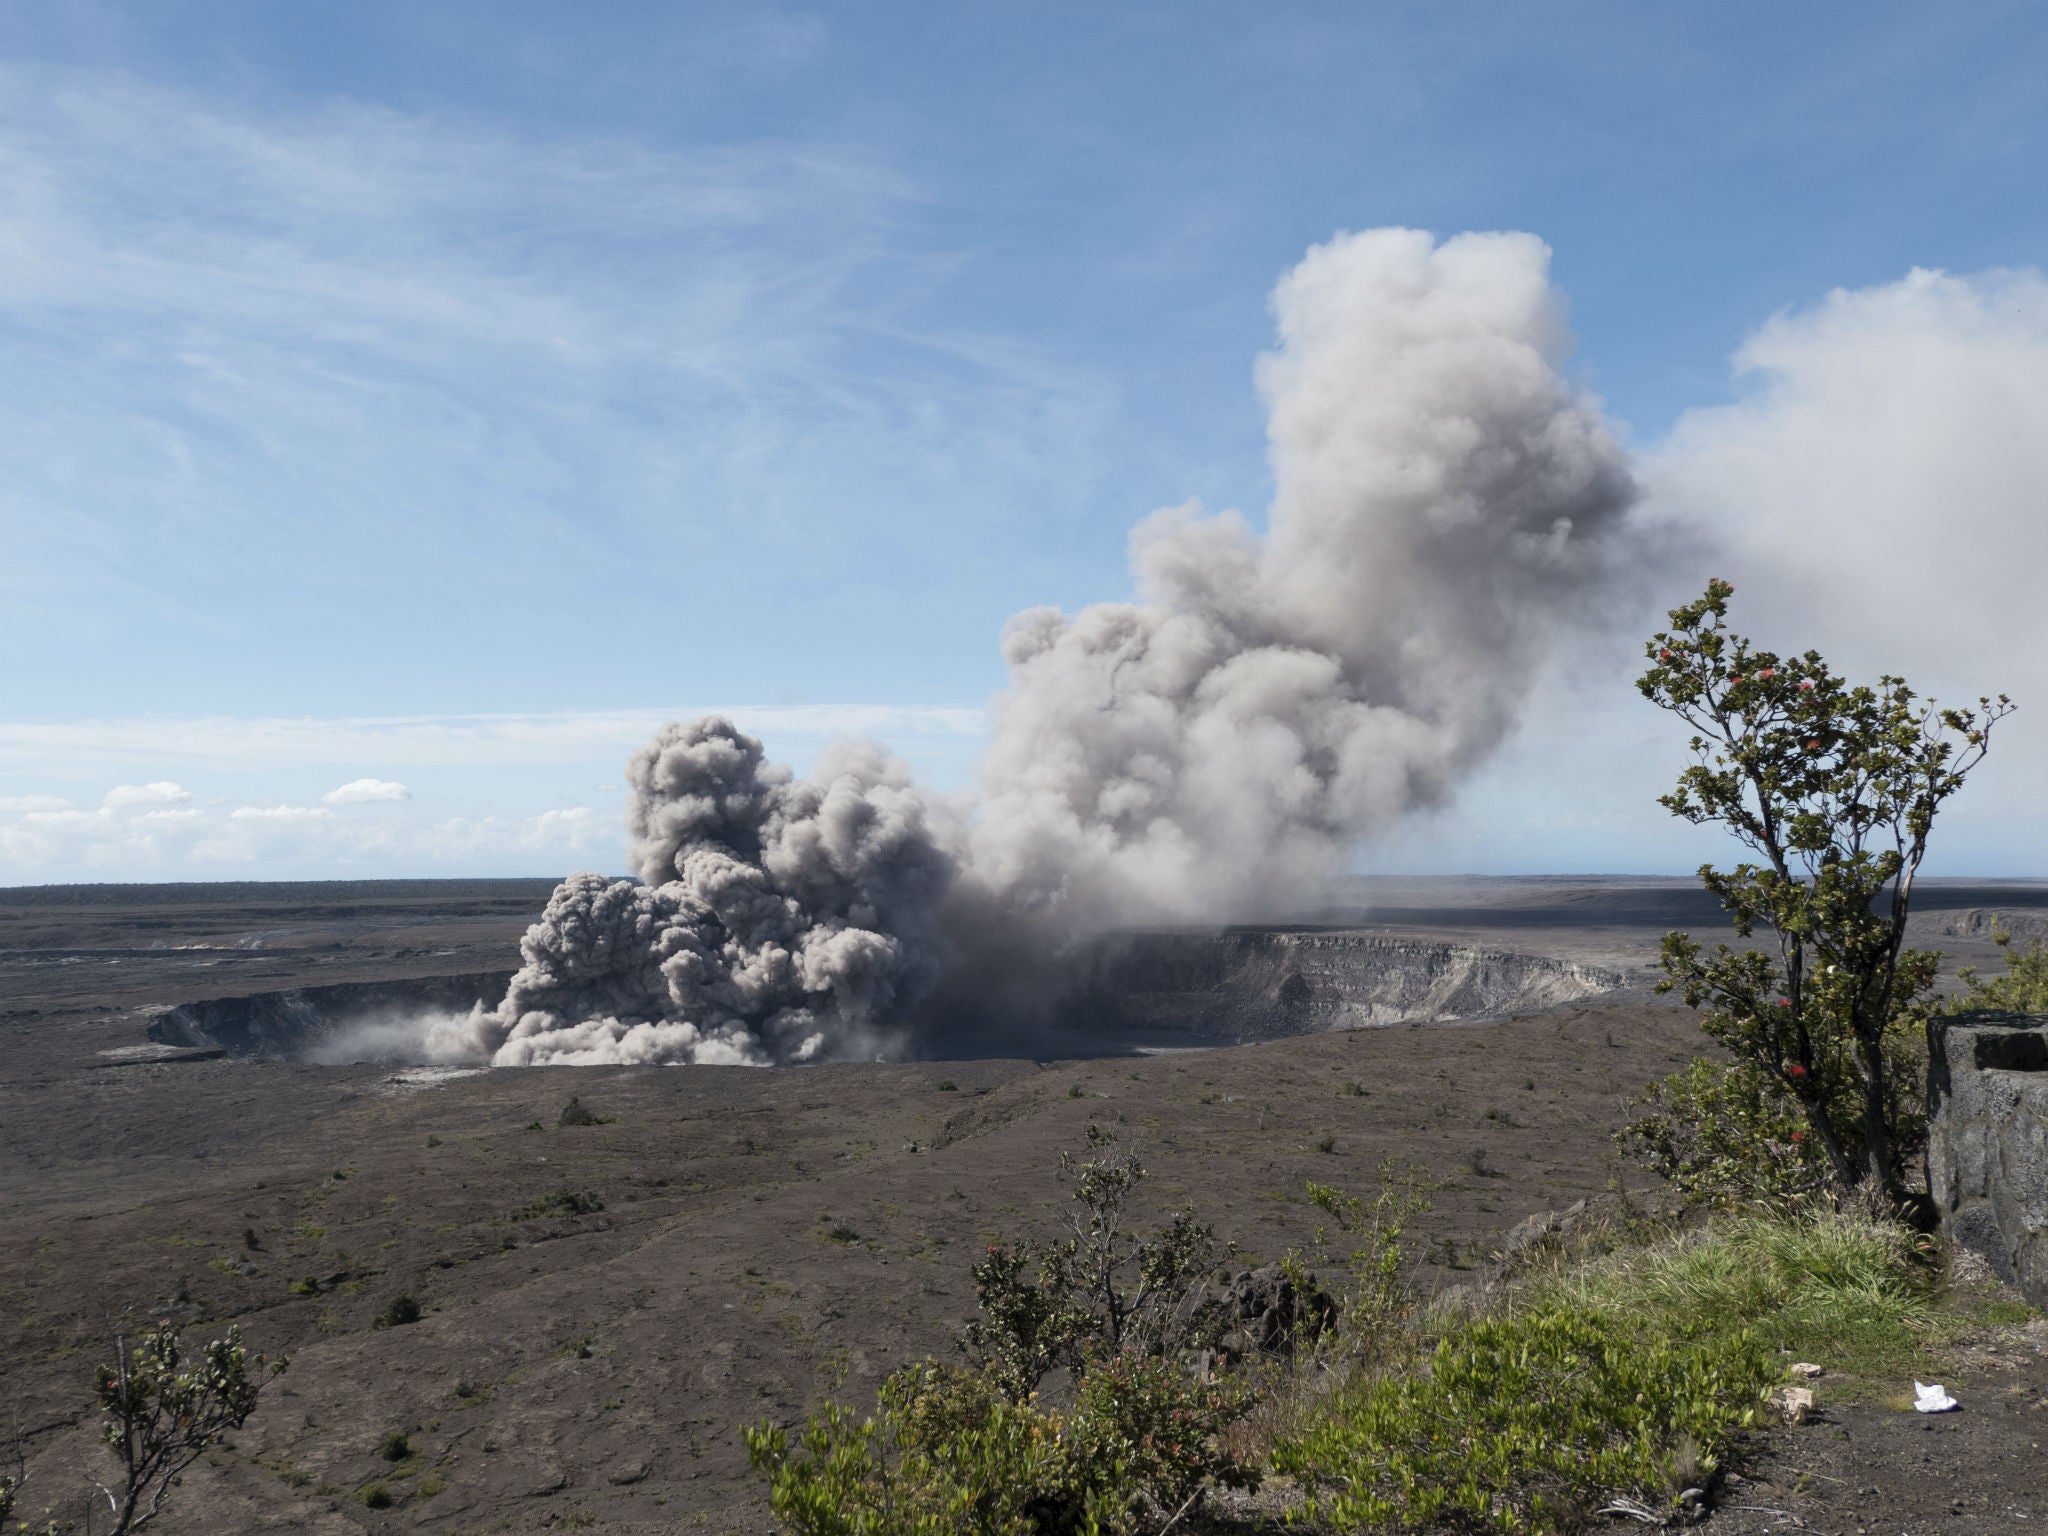 Hawaii volcano: New fissure spits lava in aftermath of Kilauea eruption